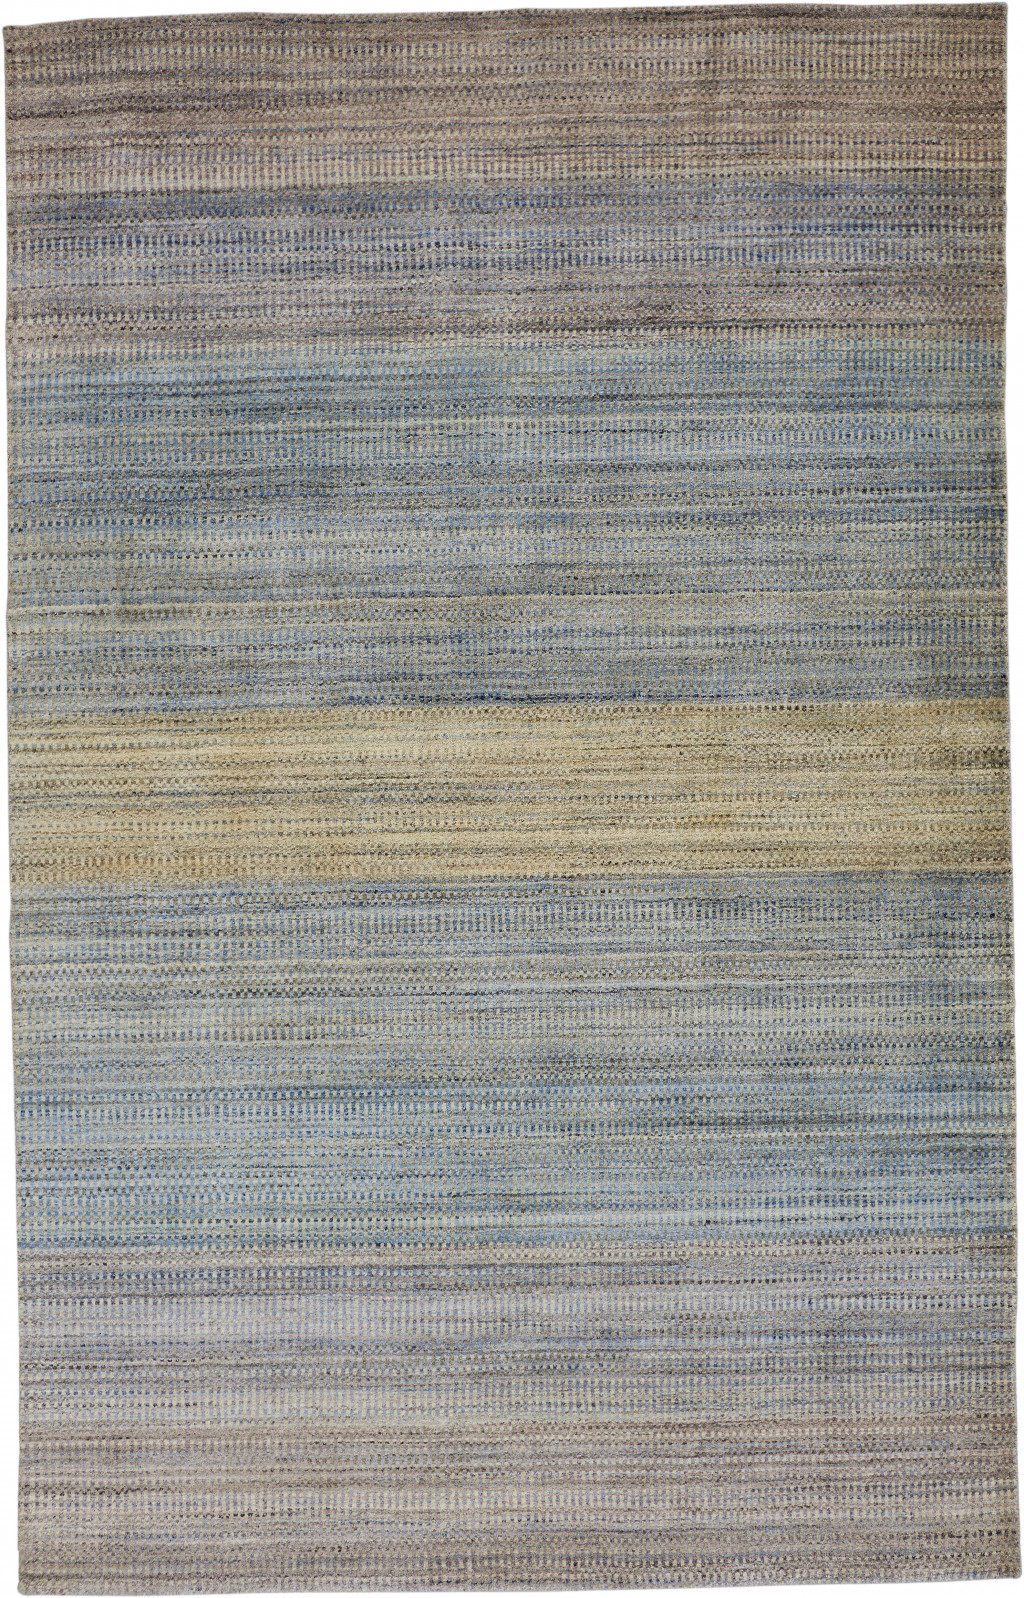 4' X 6' Blue Purple And Tan Ombre Hand Woven Area Rug-511743-1